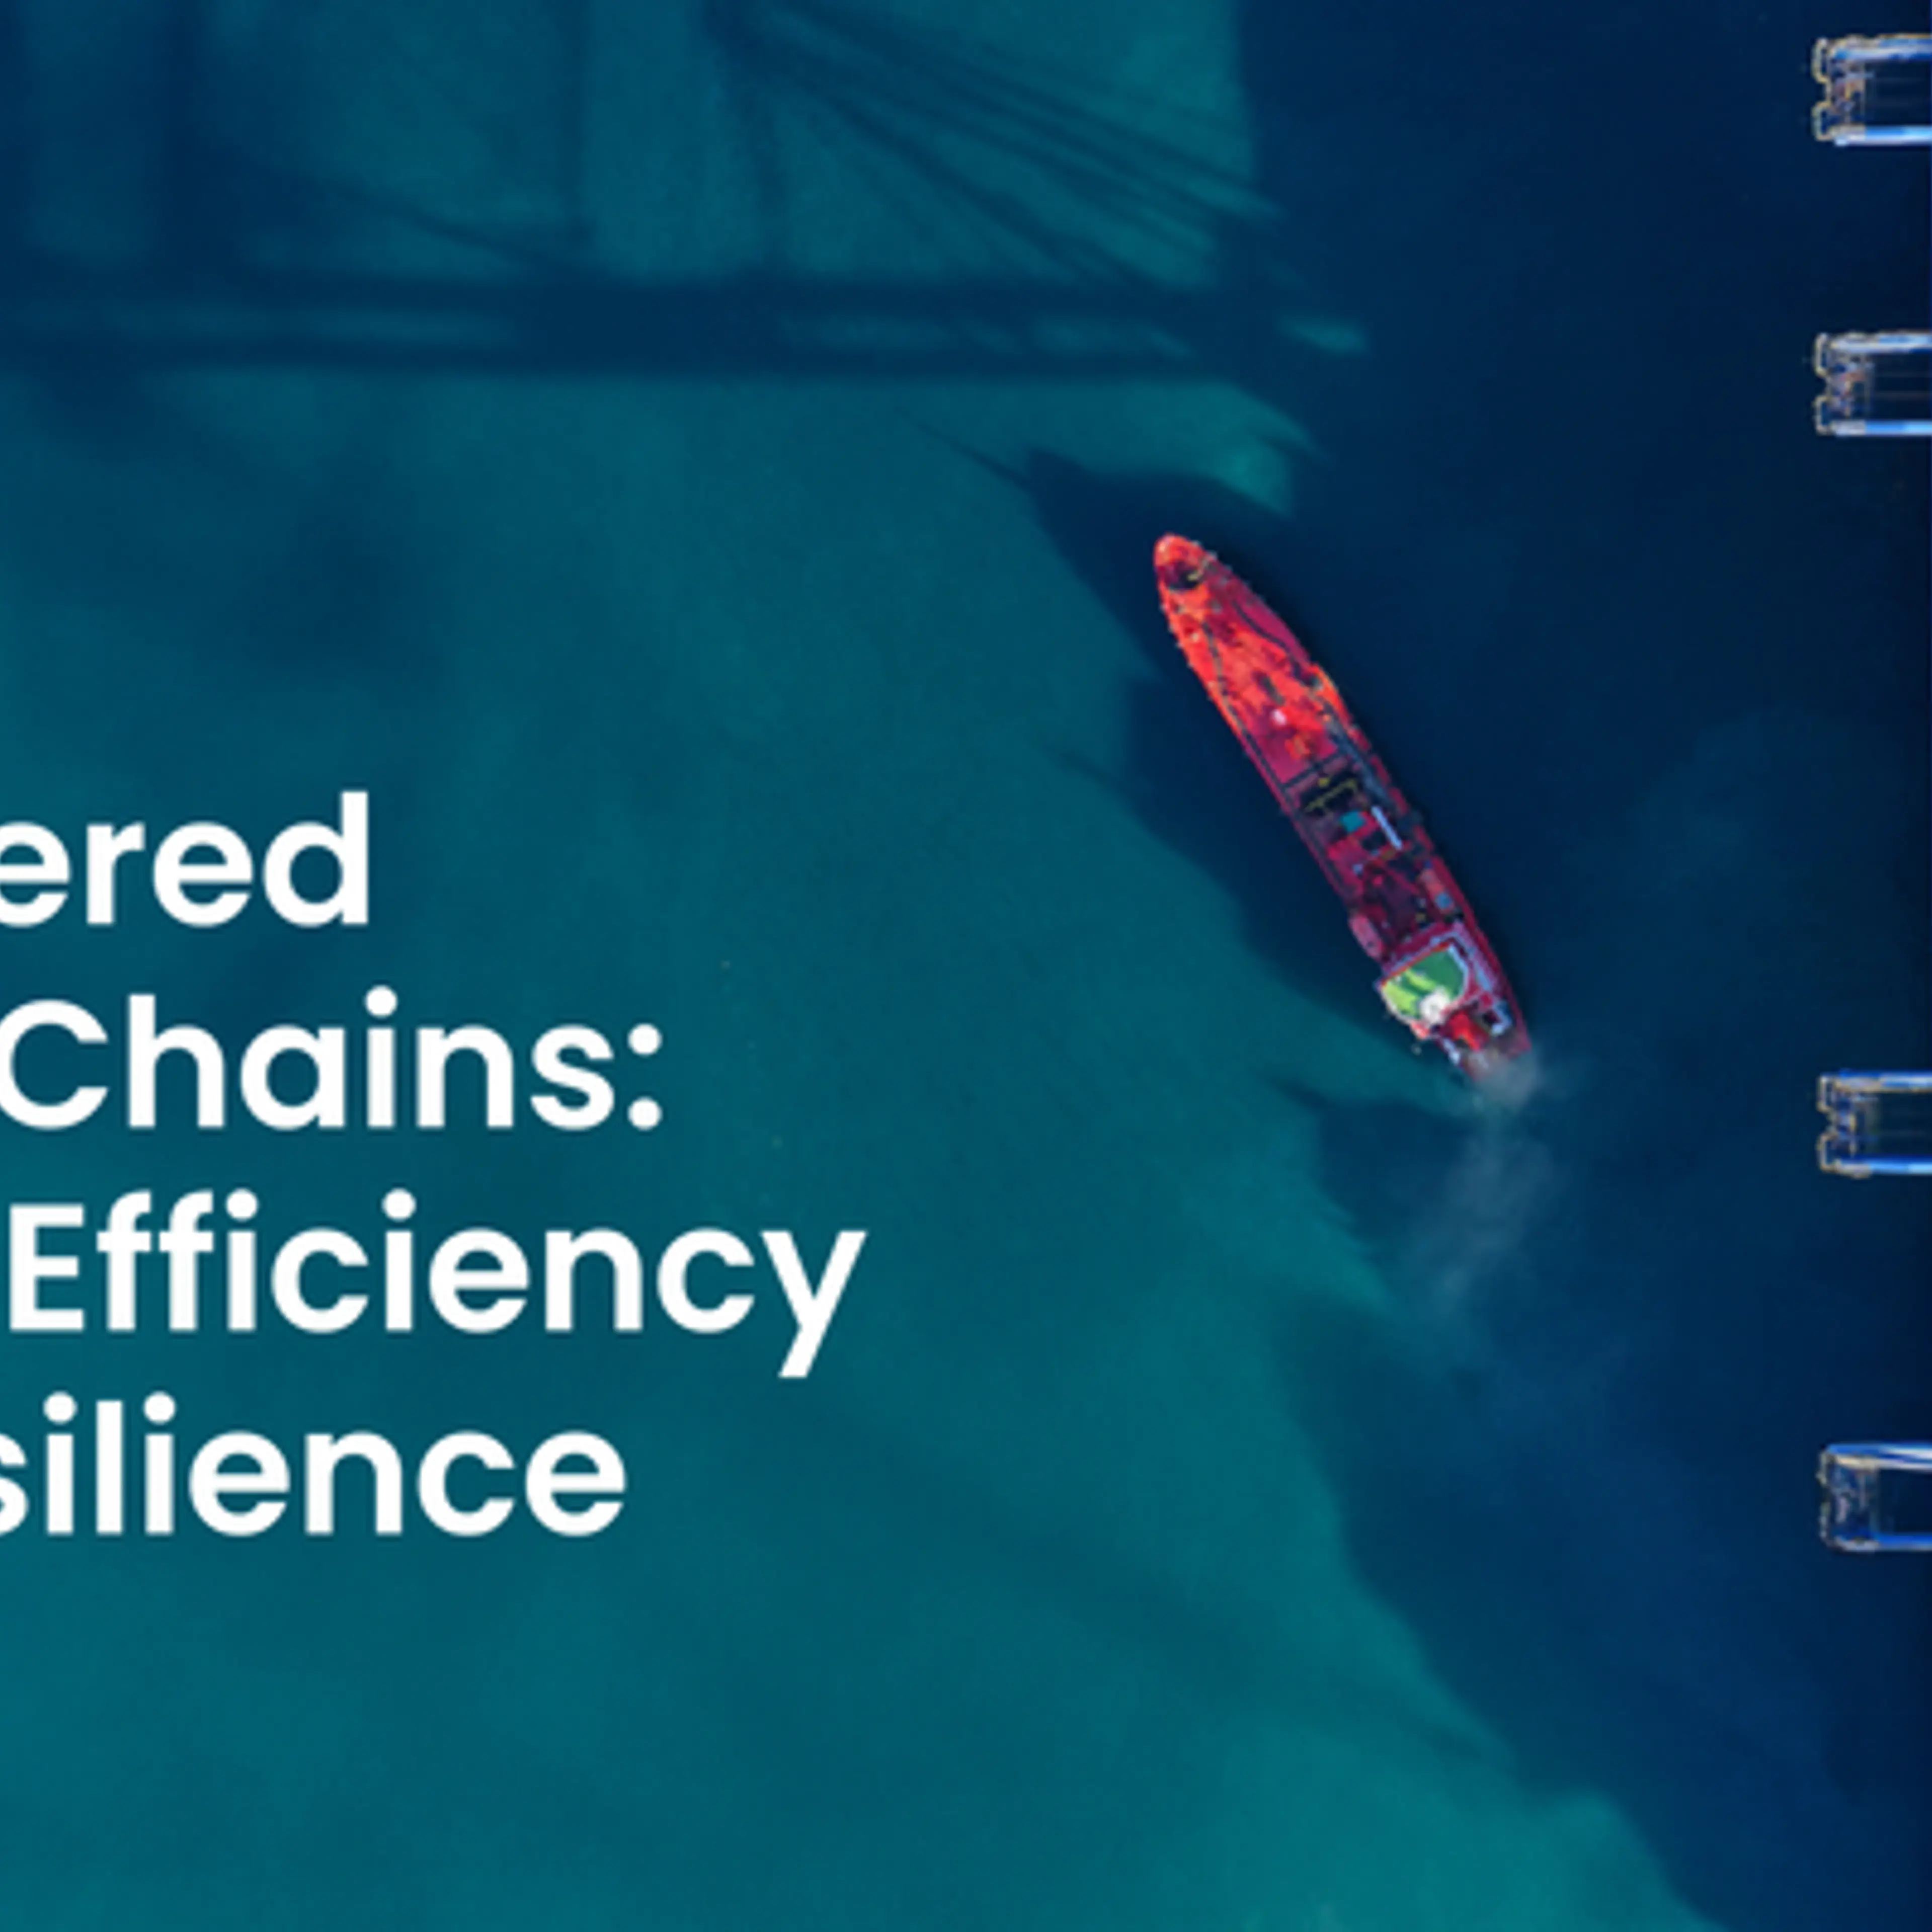 Forging resilient supply chains through data and AI